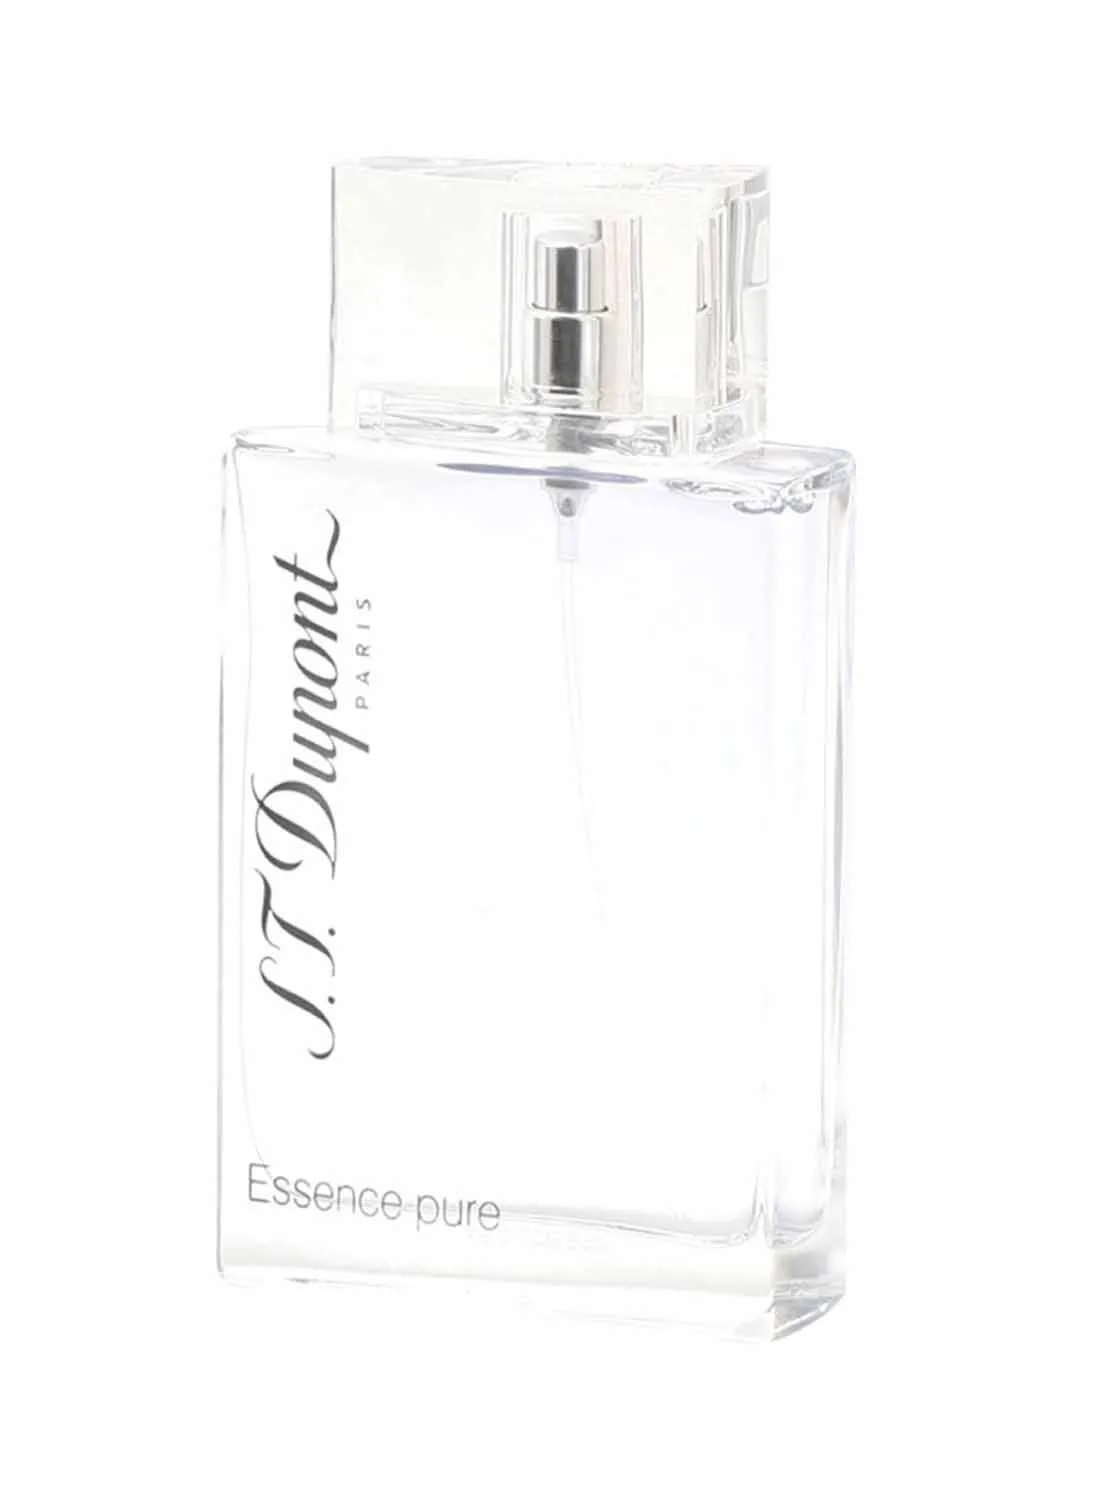 S.T.Dupont Essence Pure EDT 100ml